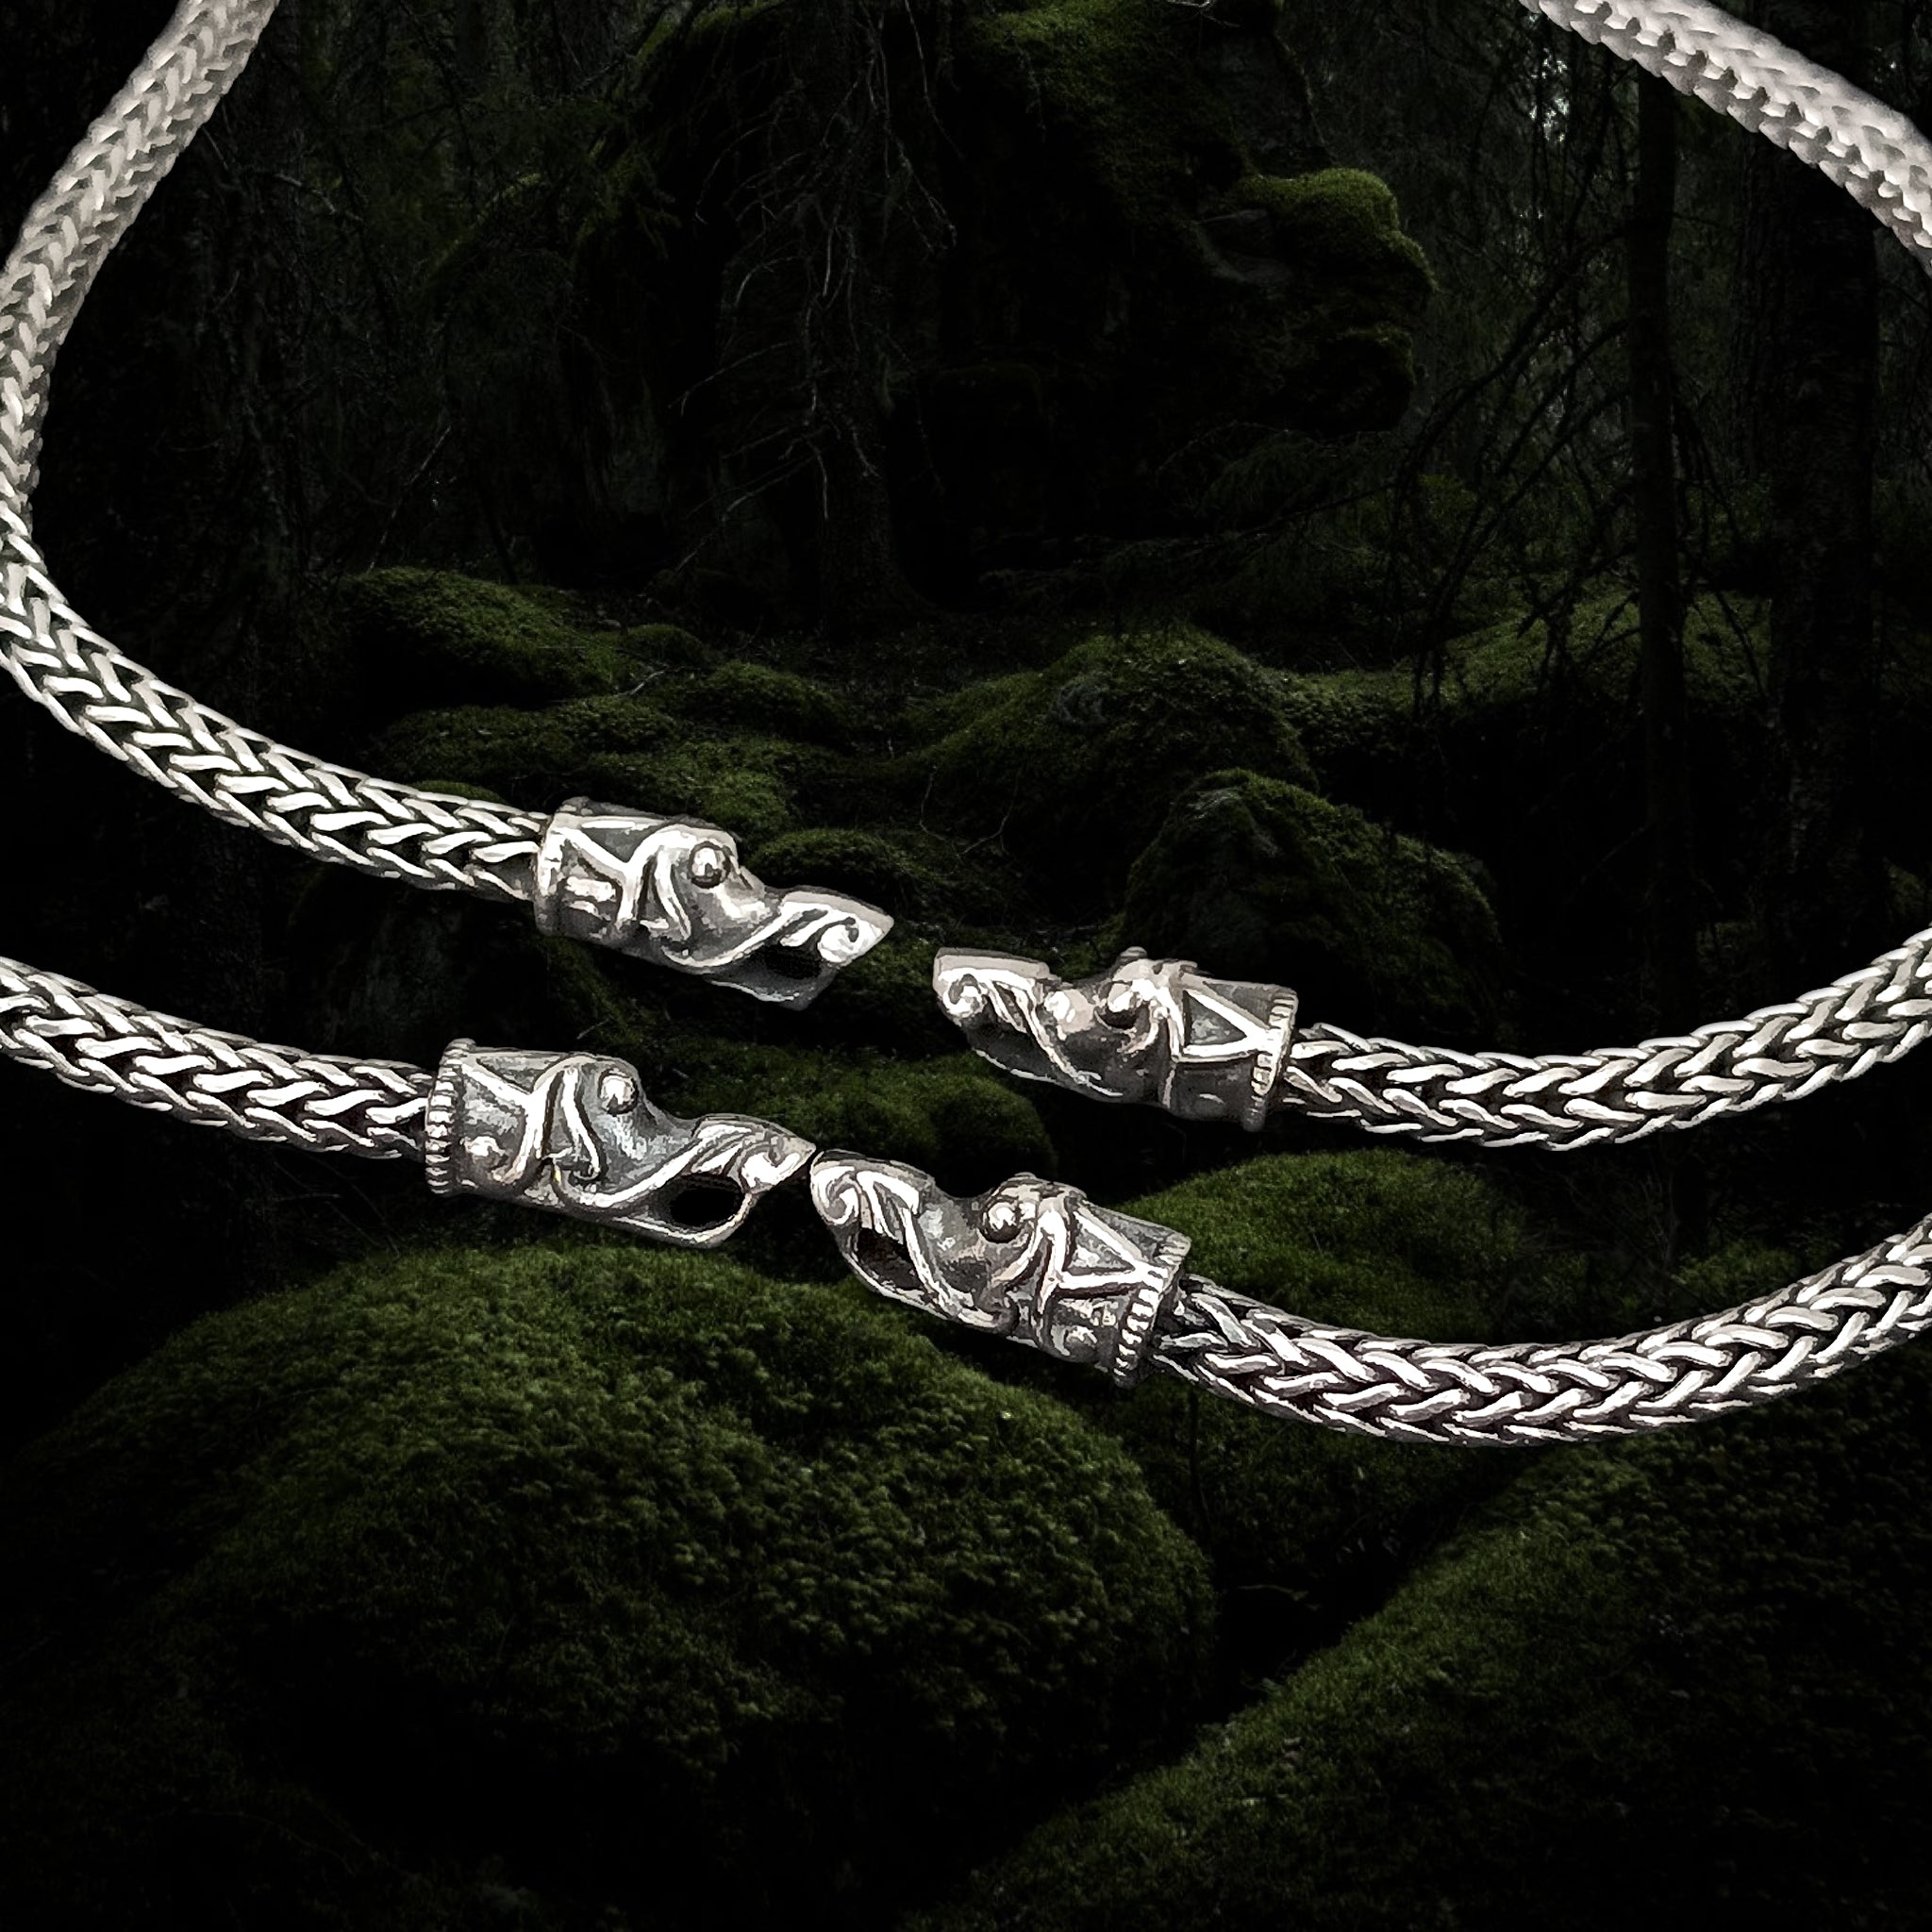 3.5mm Silver Snake Chain Necklaces - Gotland Dragon Heads - Close Up